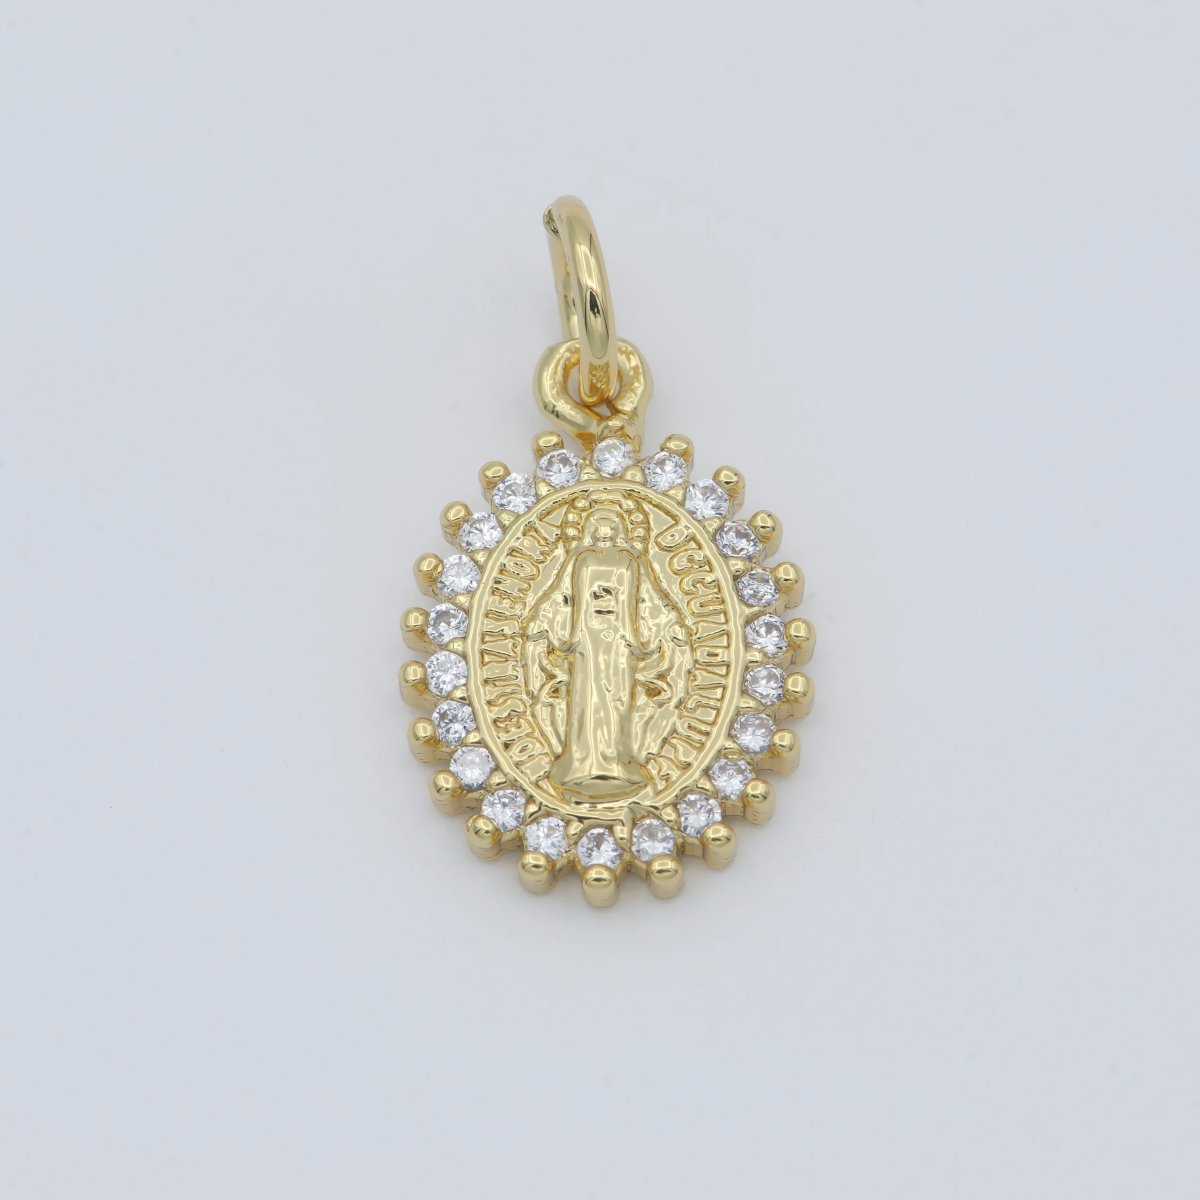 Dainty 24K Gold Filled Delicate Virgin Mother Mary Cubic Zirconia Bracelet Necklace Pendant Earring Charm Gift for Woman Jewelry Making, Gold Silver Miraculous Lady M-585 -M-592 - DLUXCA